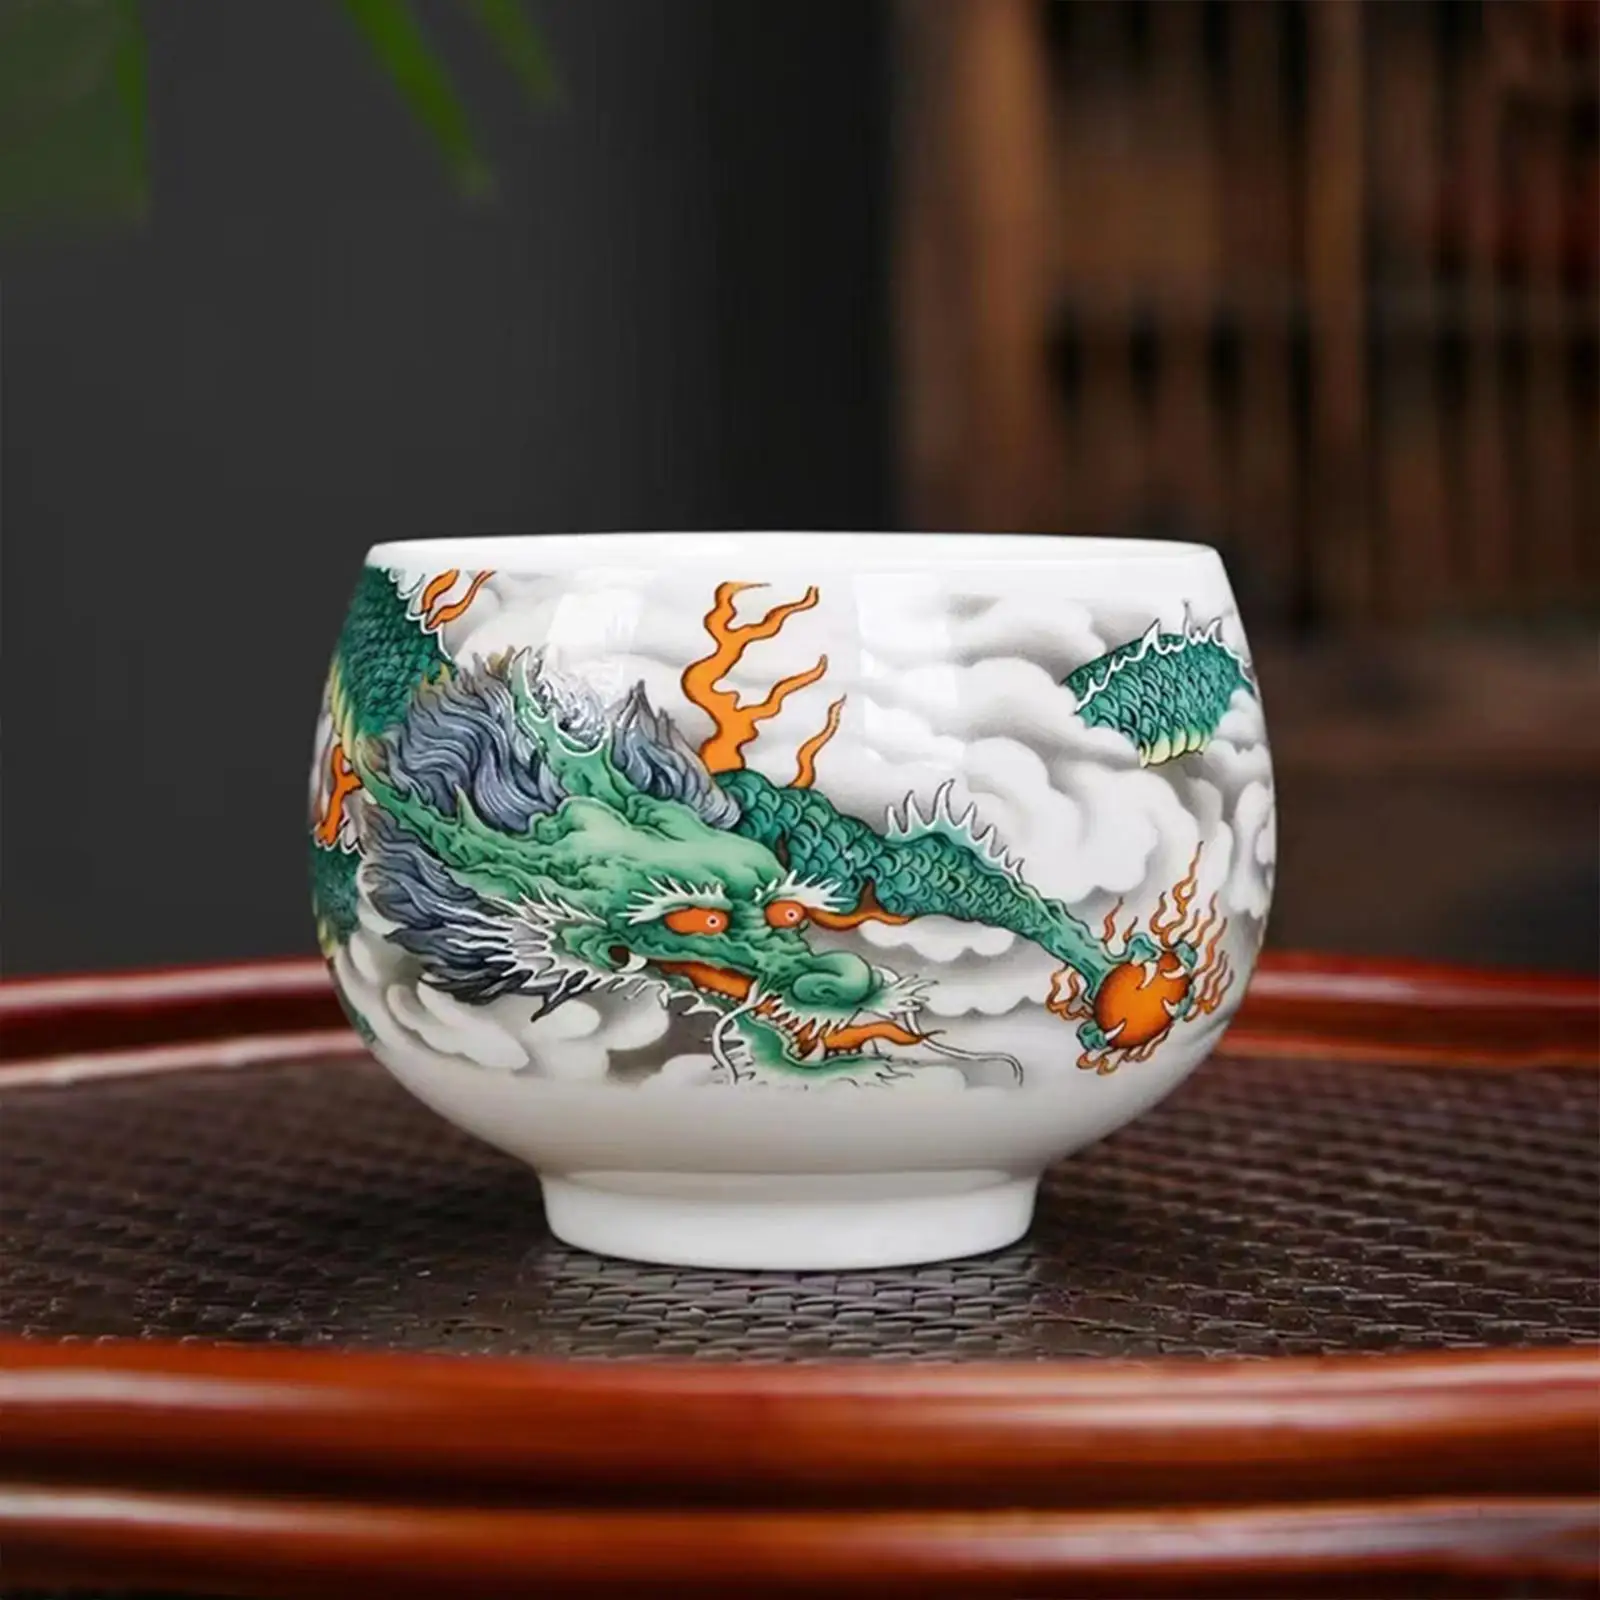 Ceramic Chinese Retro Ceramic Tea Cup Ceramic Coffee Cups Porcelain Chinese Tea Cup Classic Teaware Set for Collectible